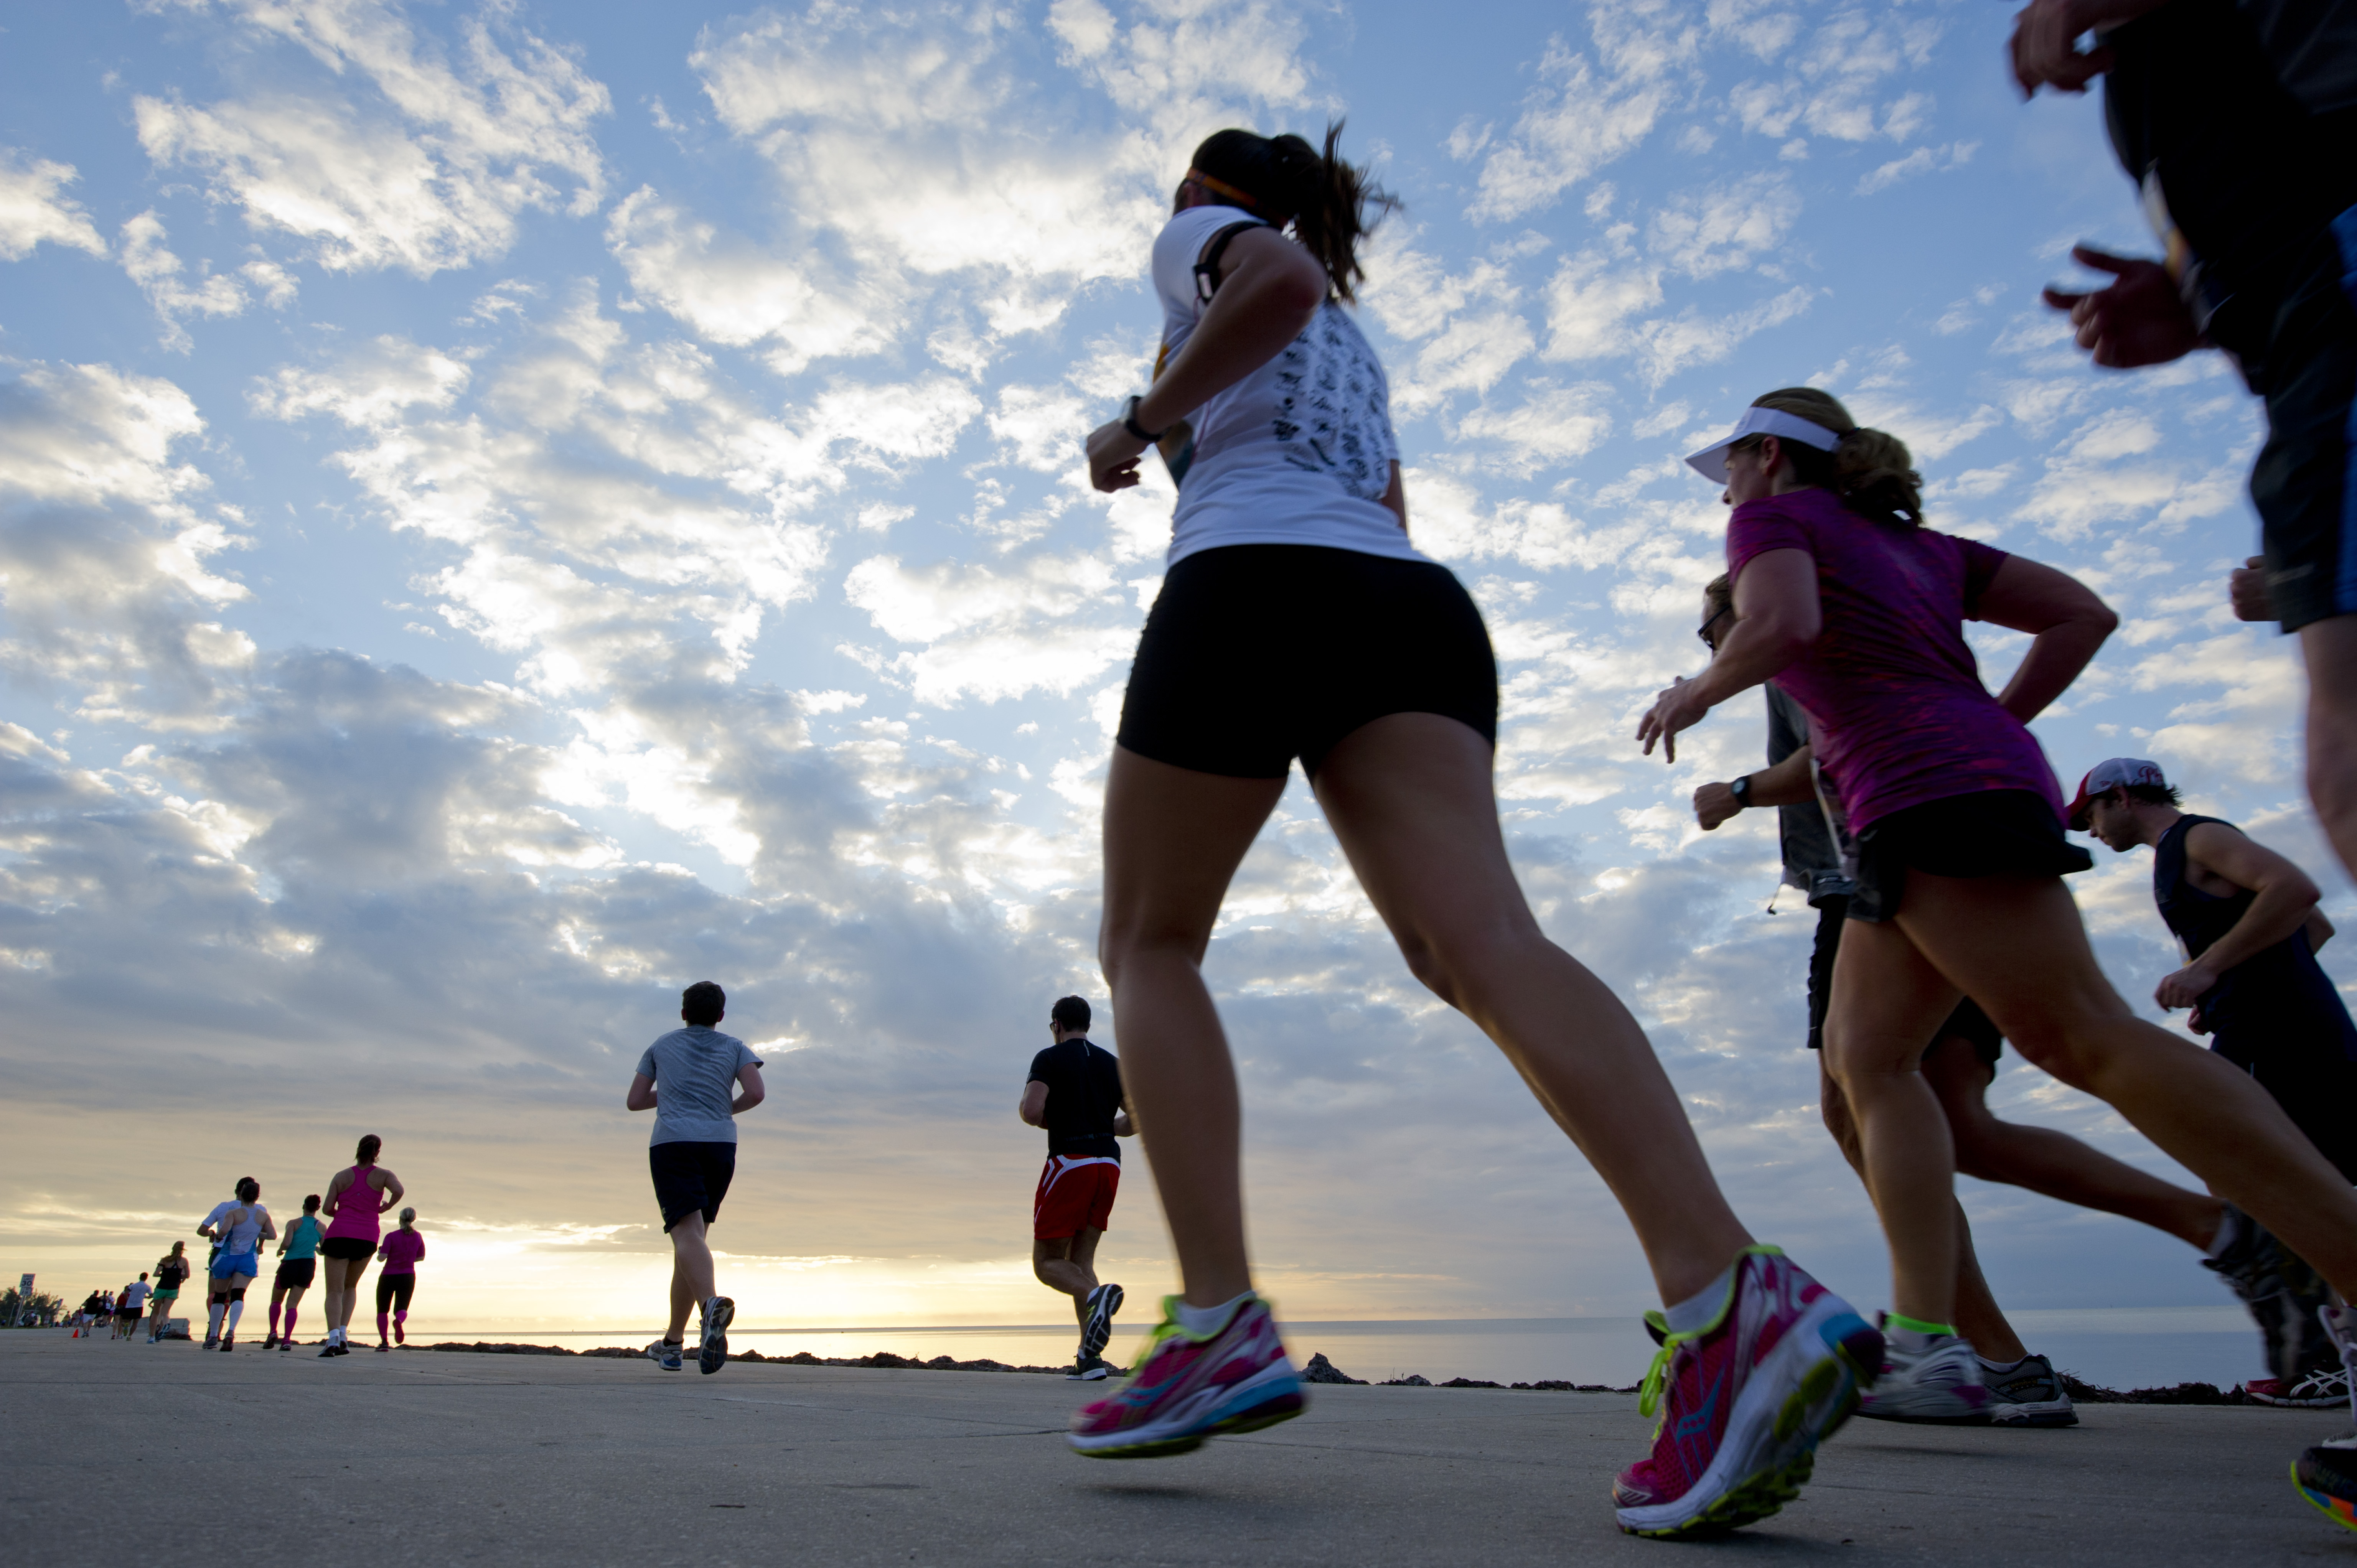 Runners follow a flat, fast 13.1-mile course through the island city’s scenic Old Town and along the Atlantic Ocean shoreline. Pics: Rob O'Neal